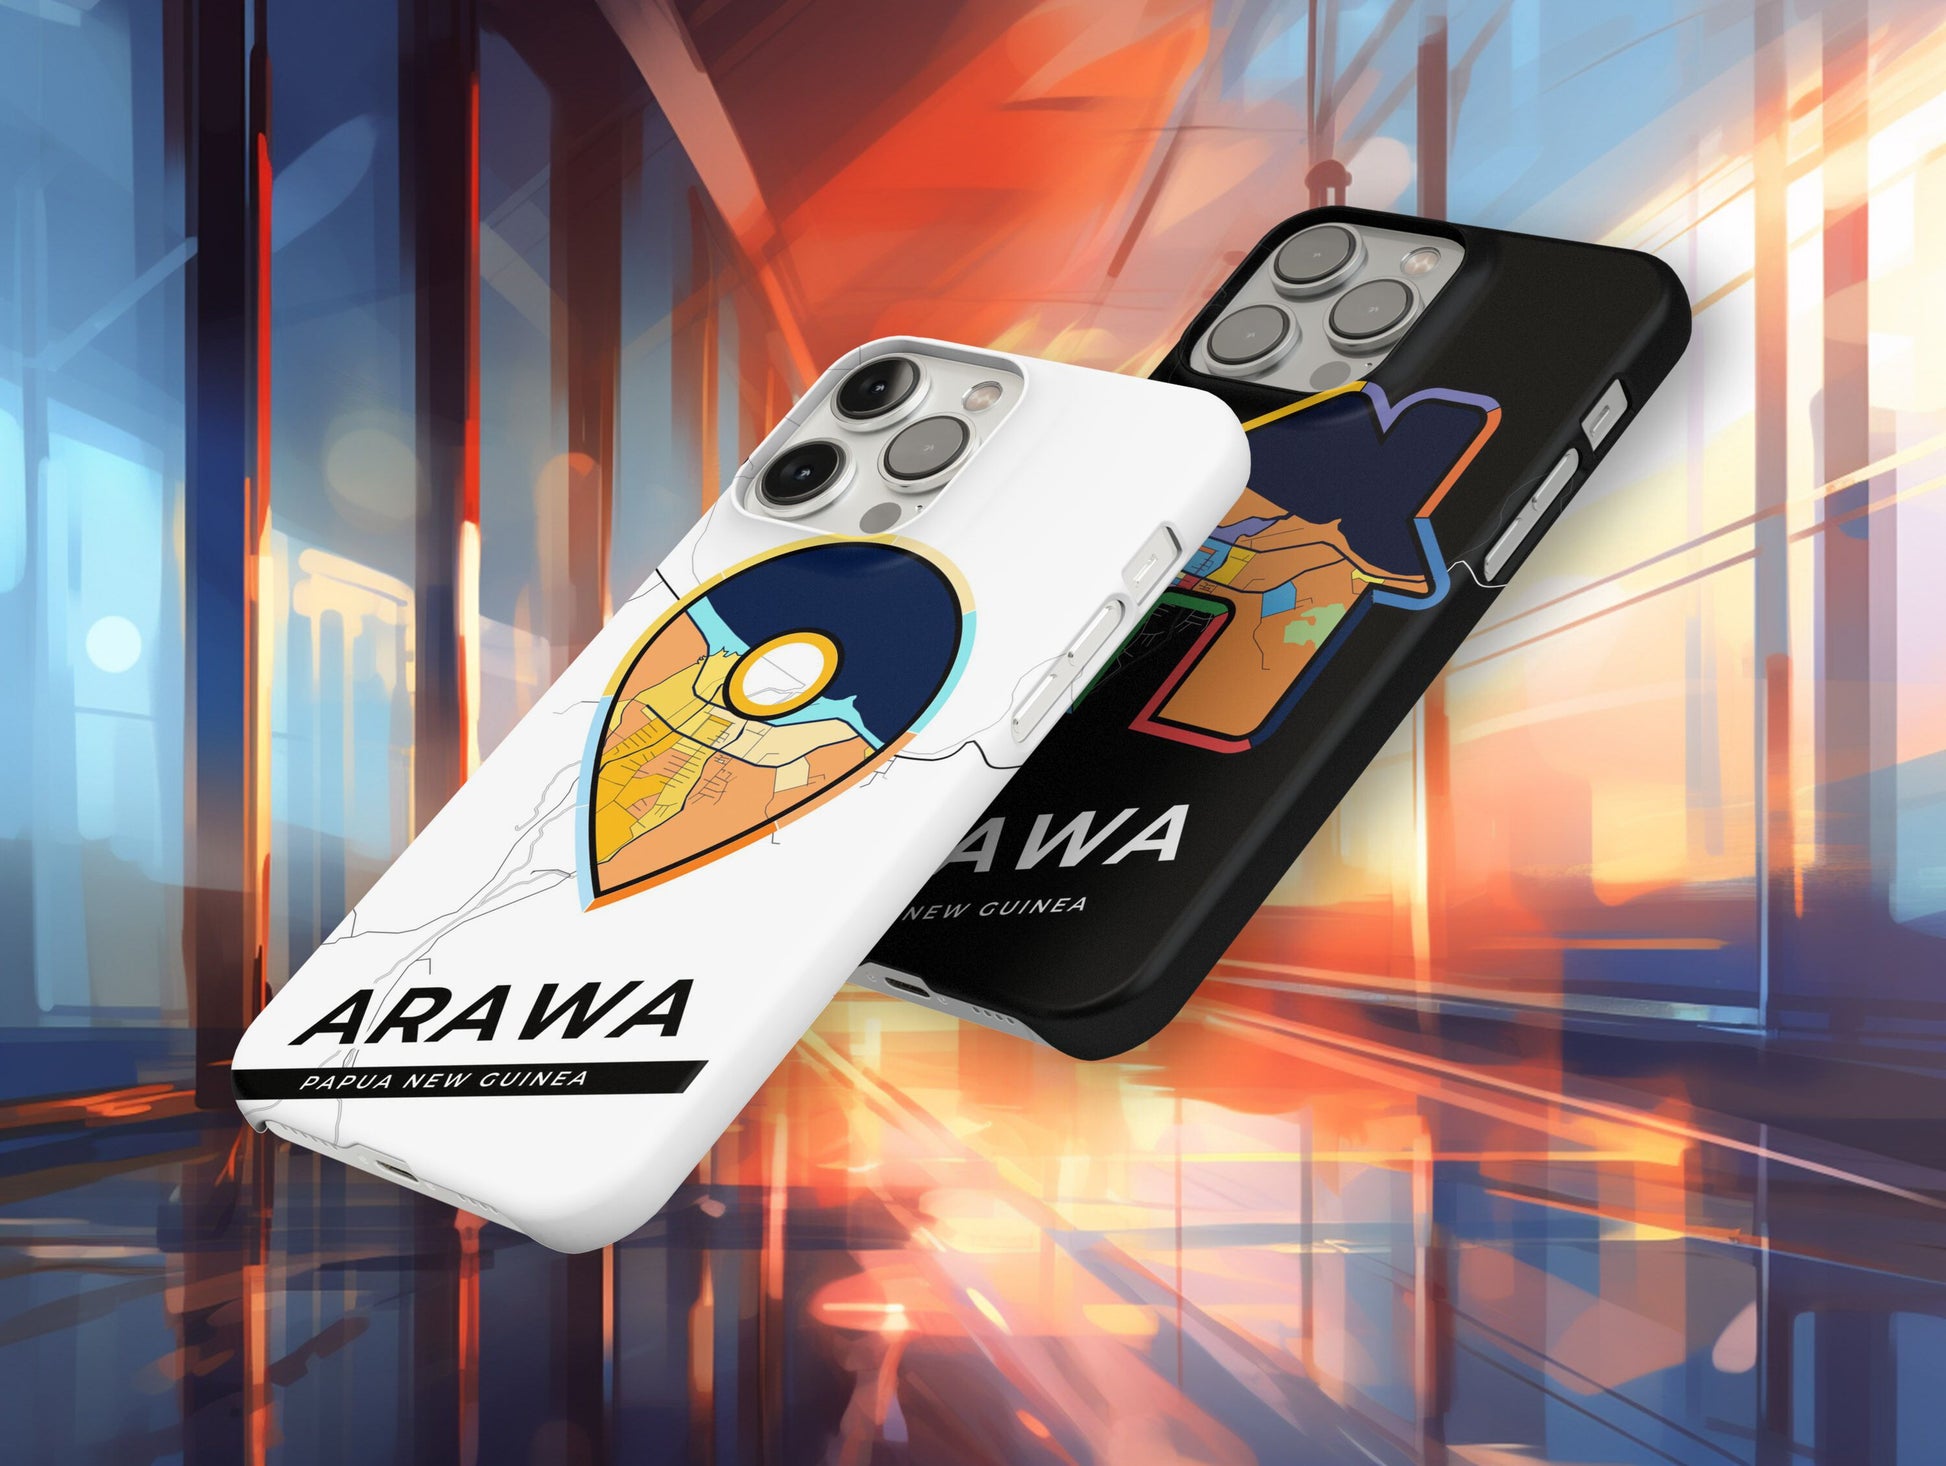 Arawa Papua New Guinea slim phone case with colorful icon. Birthday, wedding or housewarming gift. Couple match cases.